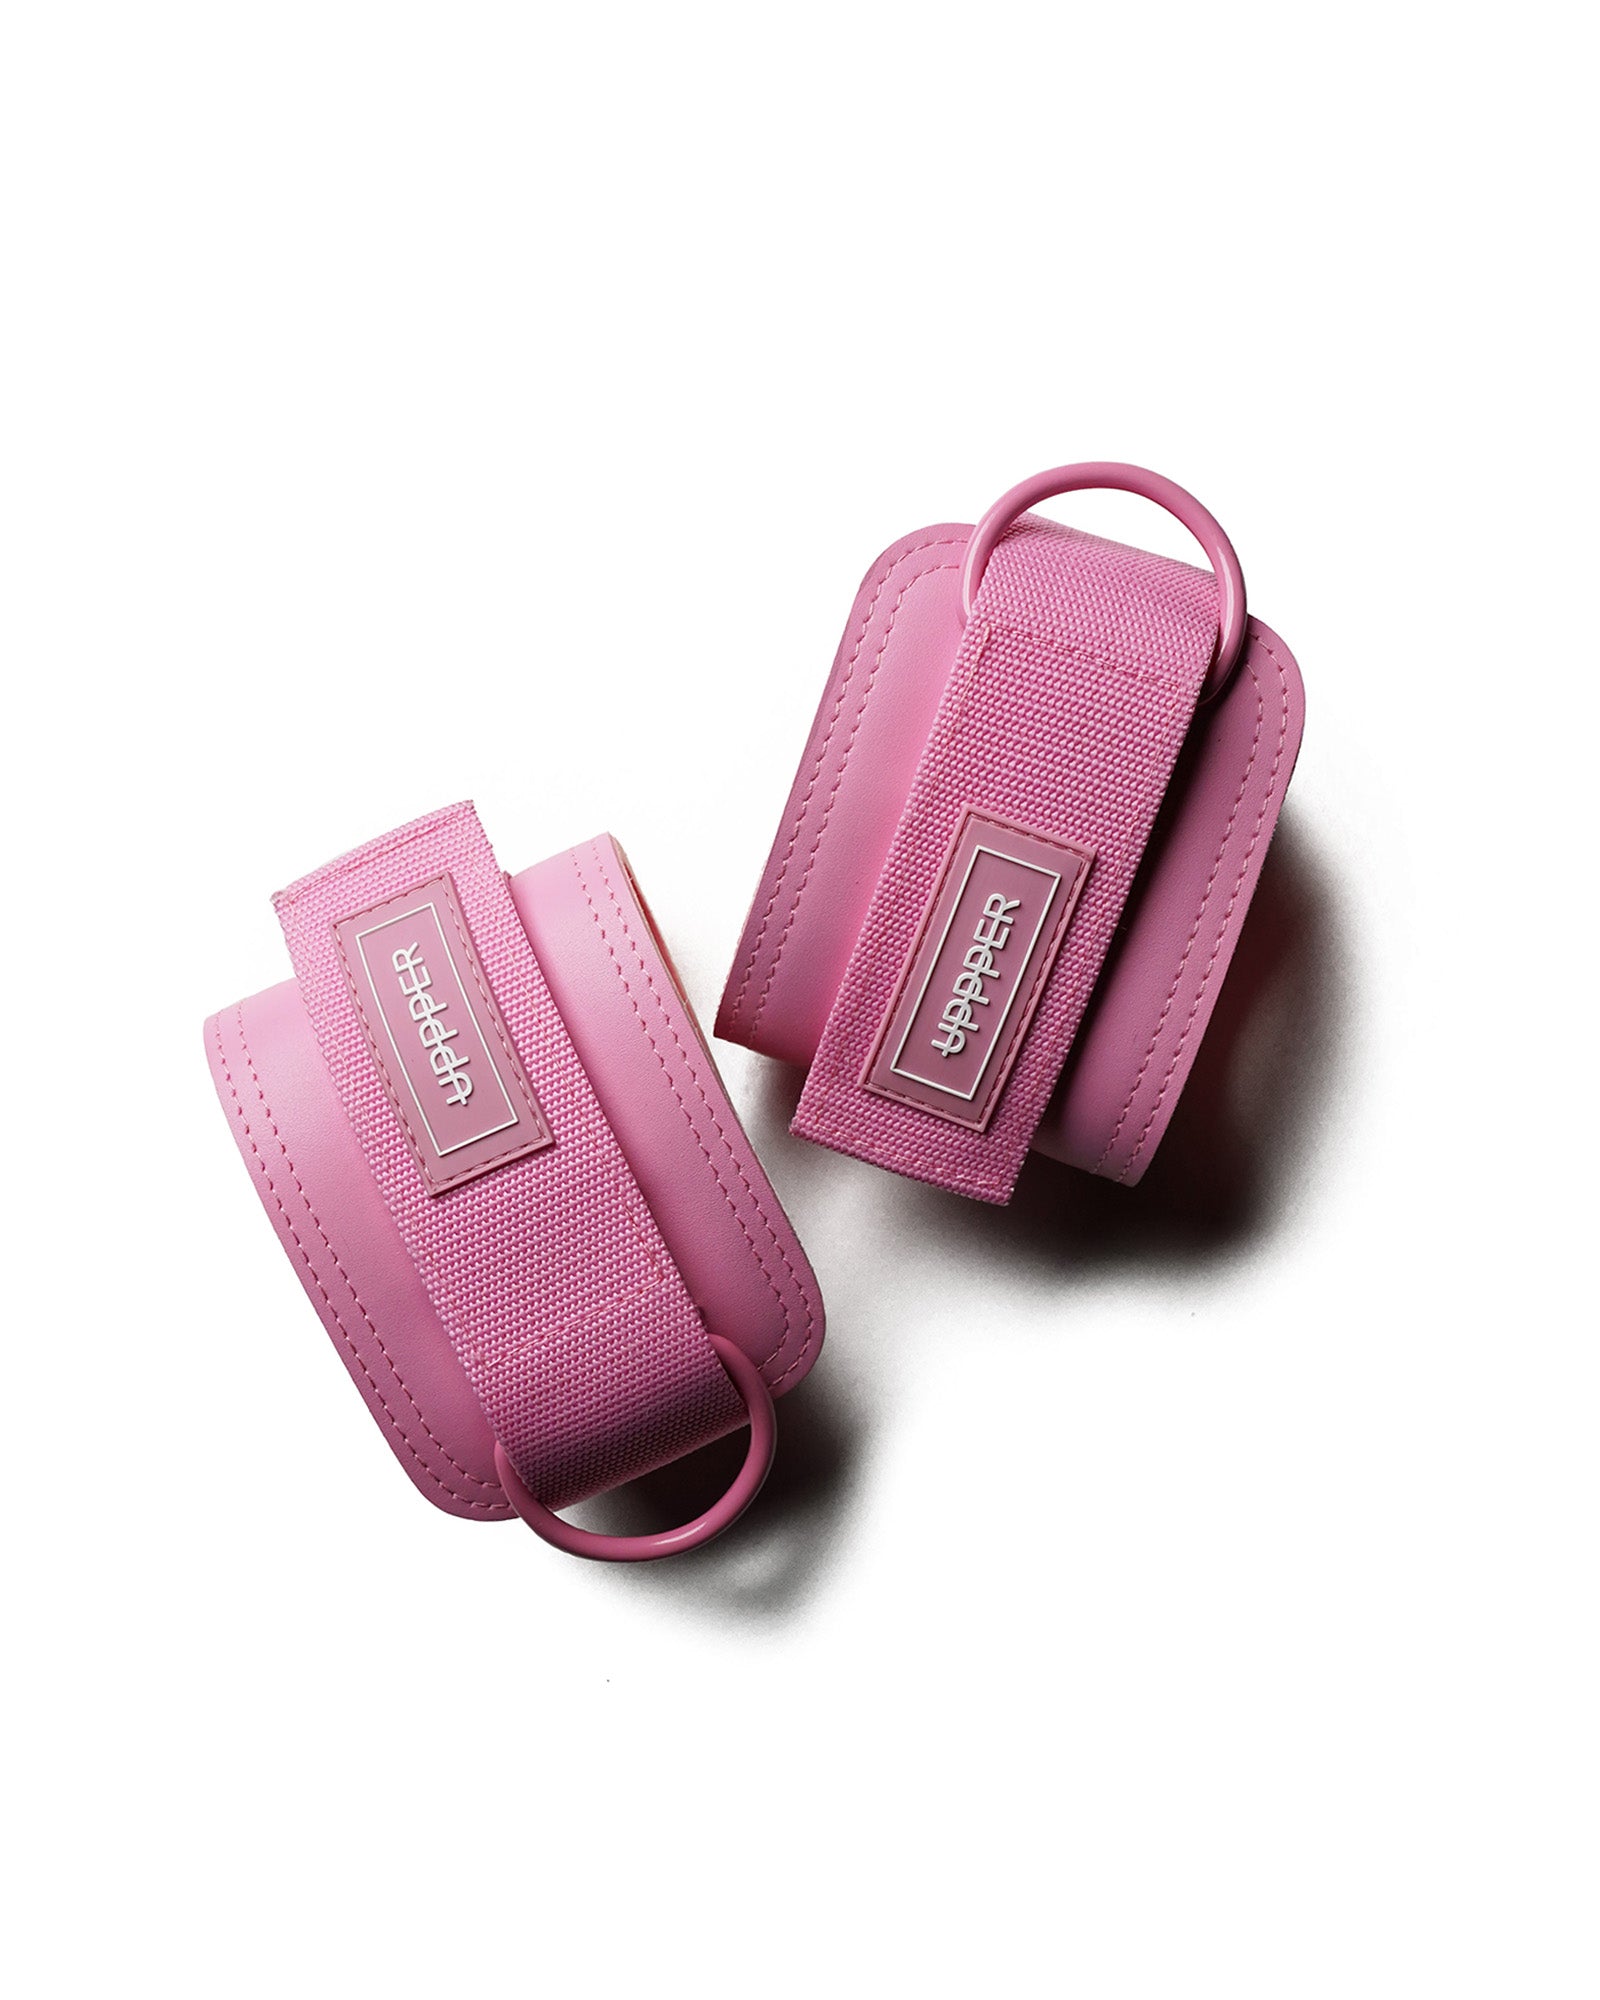 uppper ankle straps pink